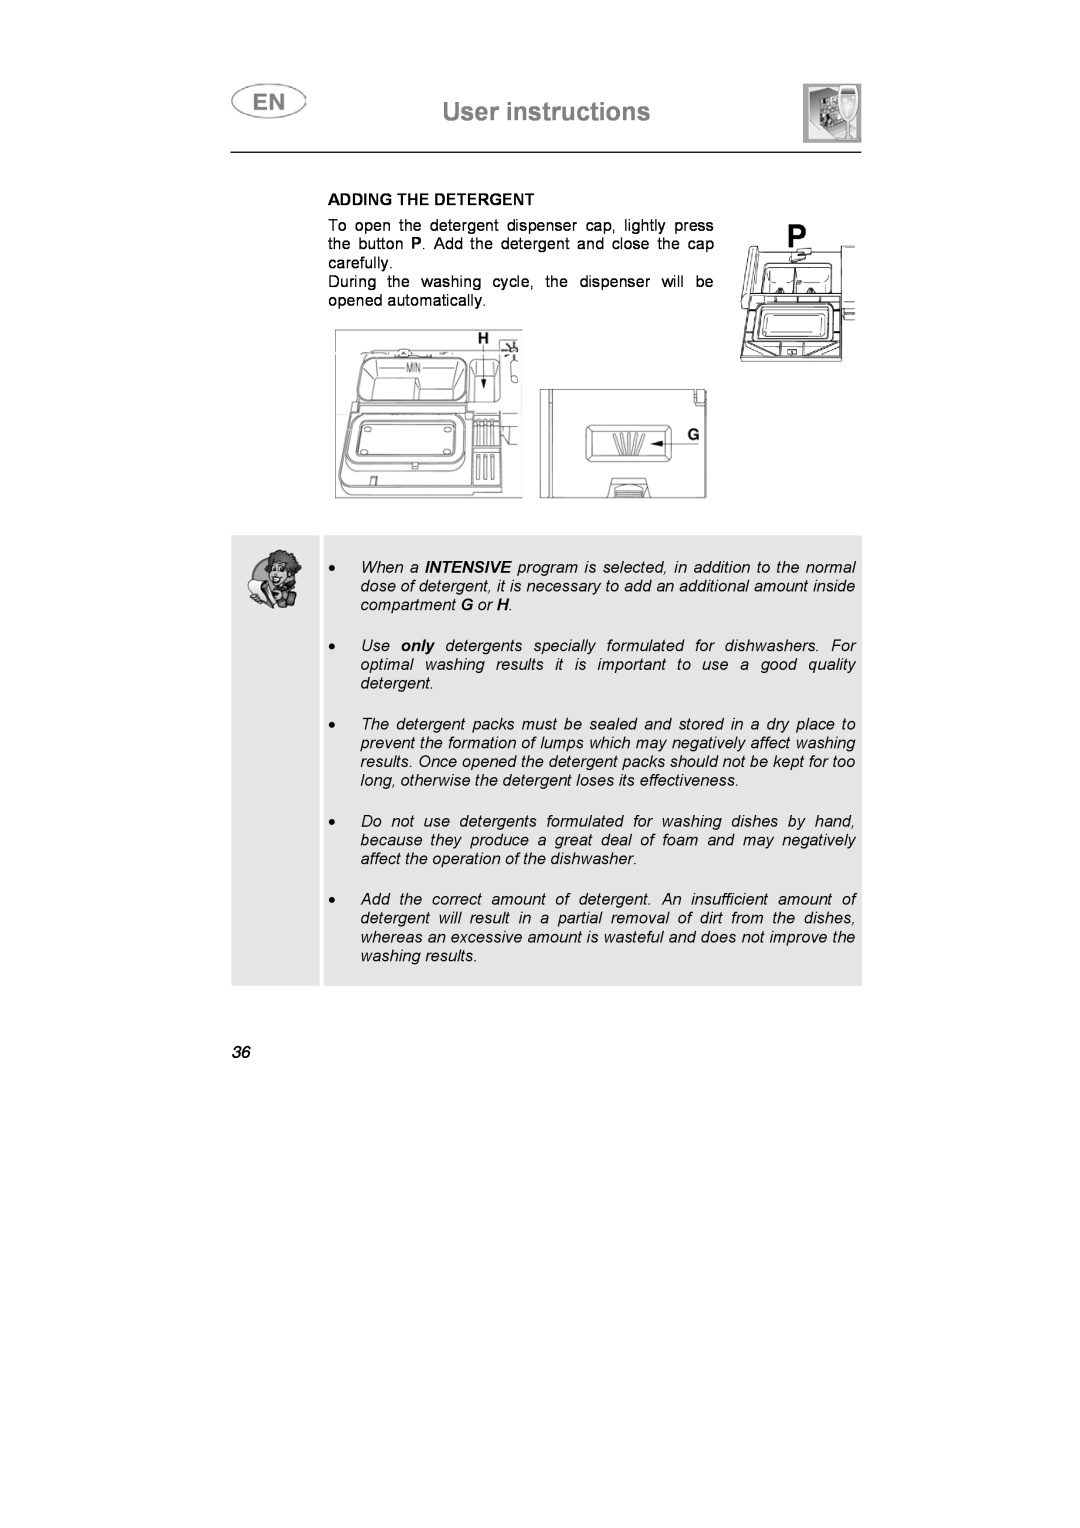 Smeg APL12-1 User instructions, Adding The Detergent, During the washing cycle, the dispenser will be opened automatically 